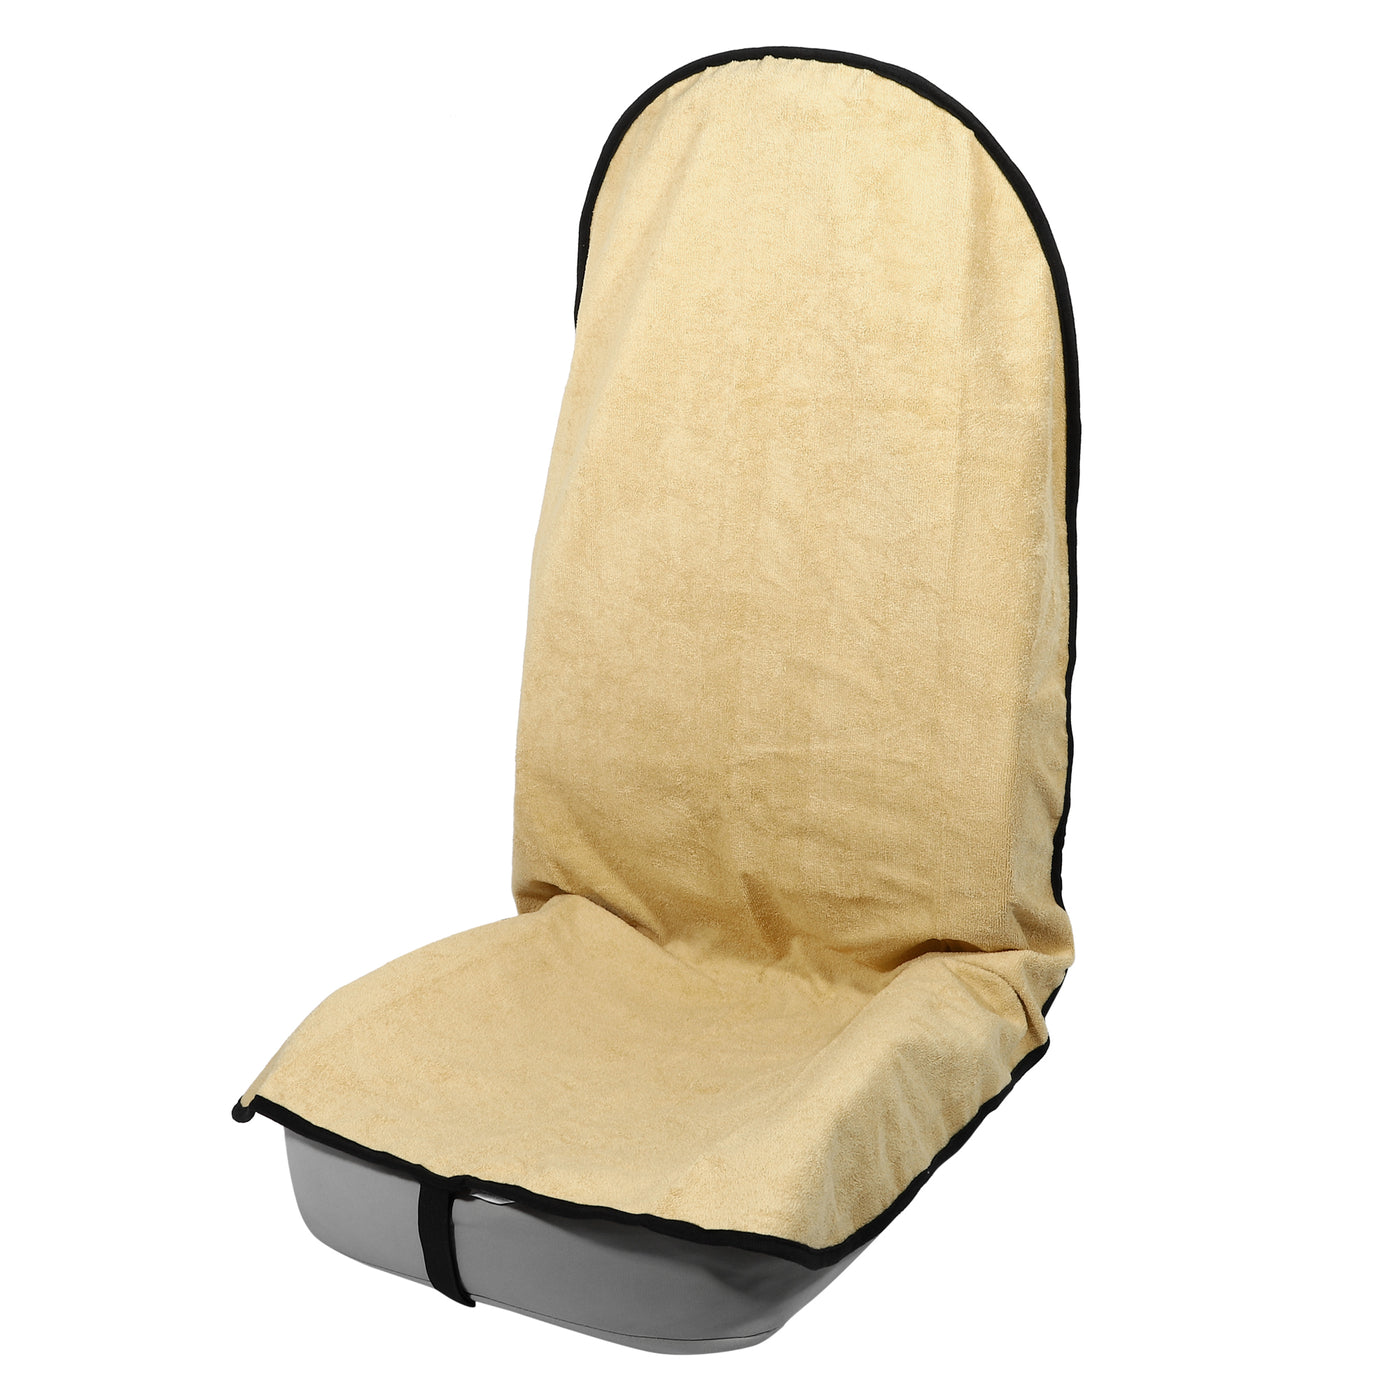 X AUTOHAUX Beige Universal Car Seat Cover Anti-Slip Towel Seat Protector Pad for Car Trucks SUV